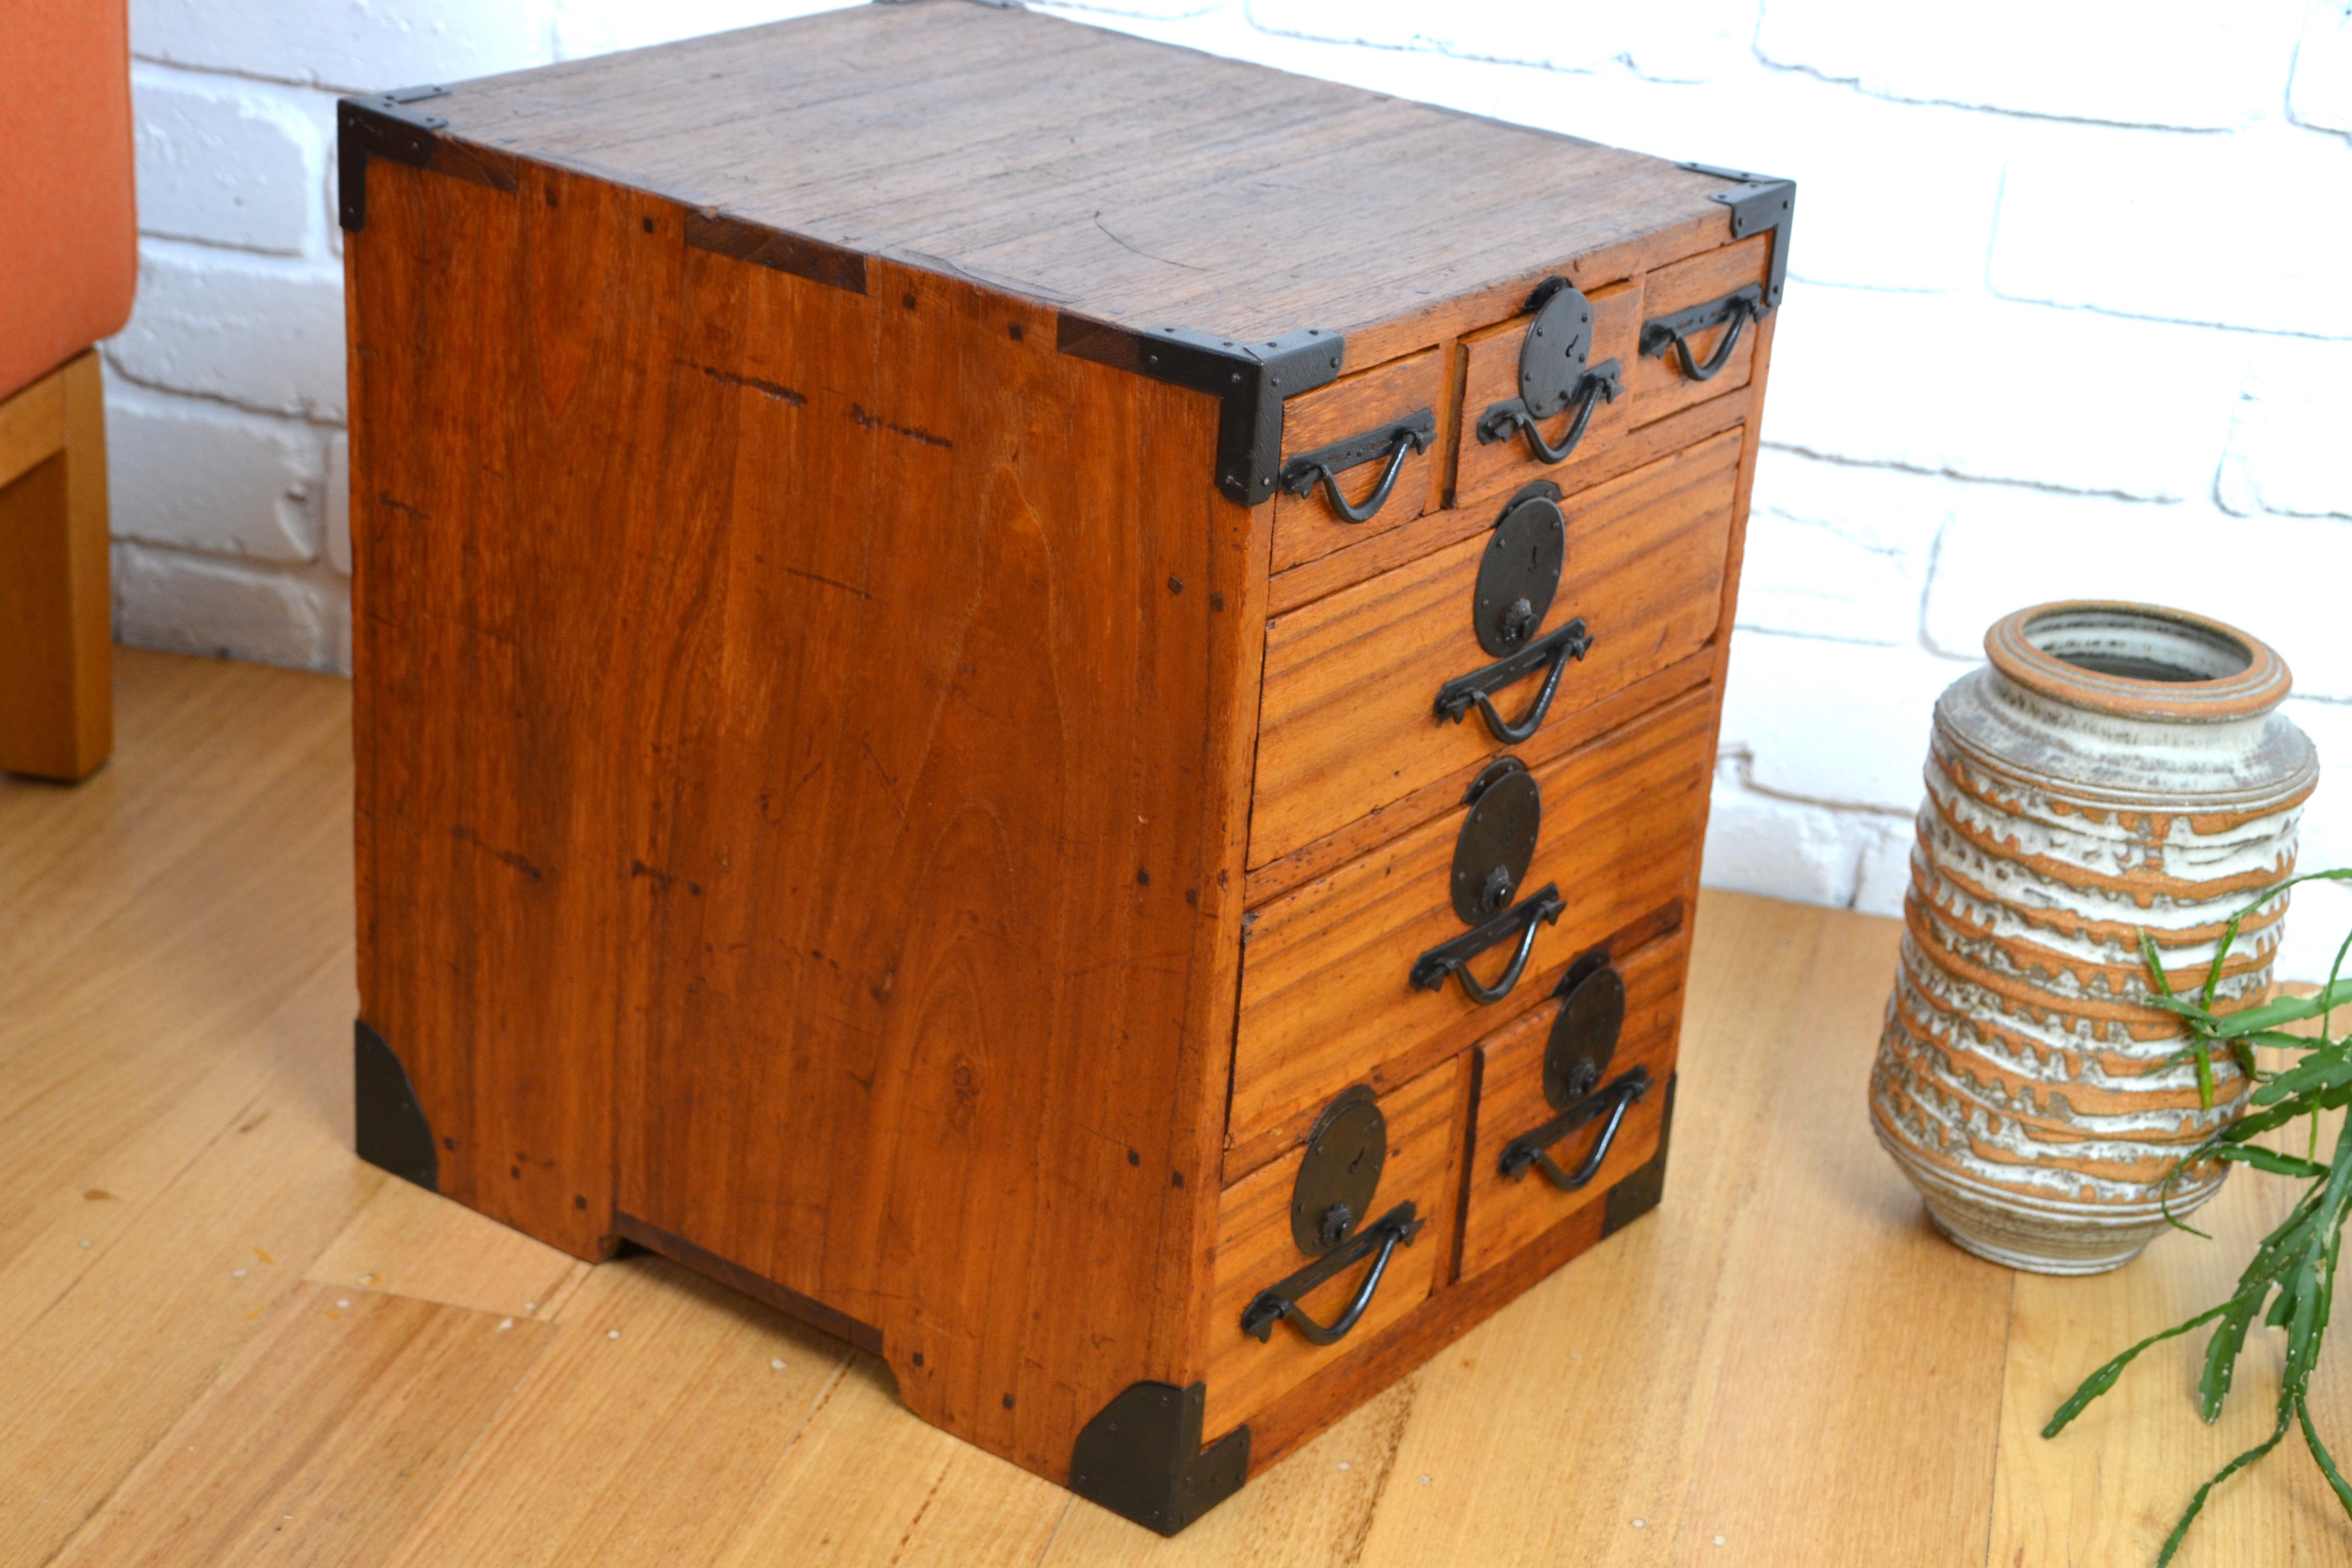 Antique Japanese small chest / multi-drawer jewellery box / Bedside table - Meiji period 1800s